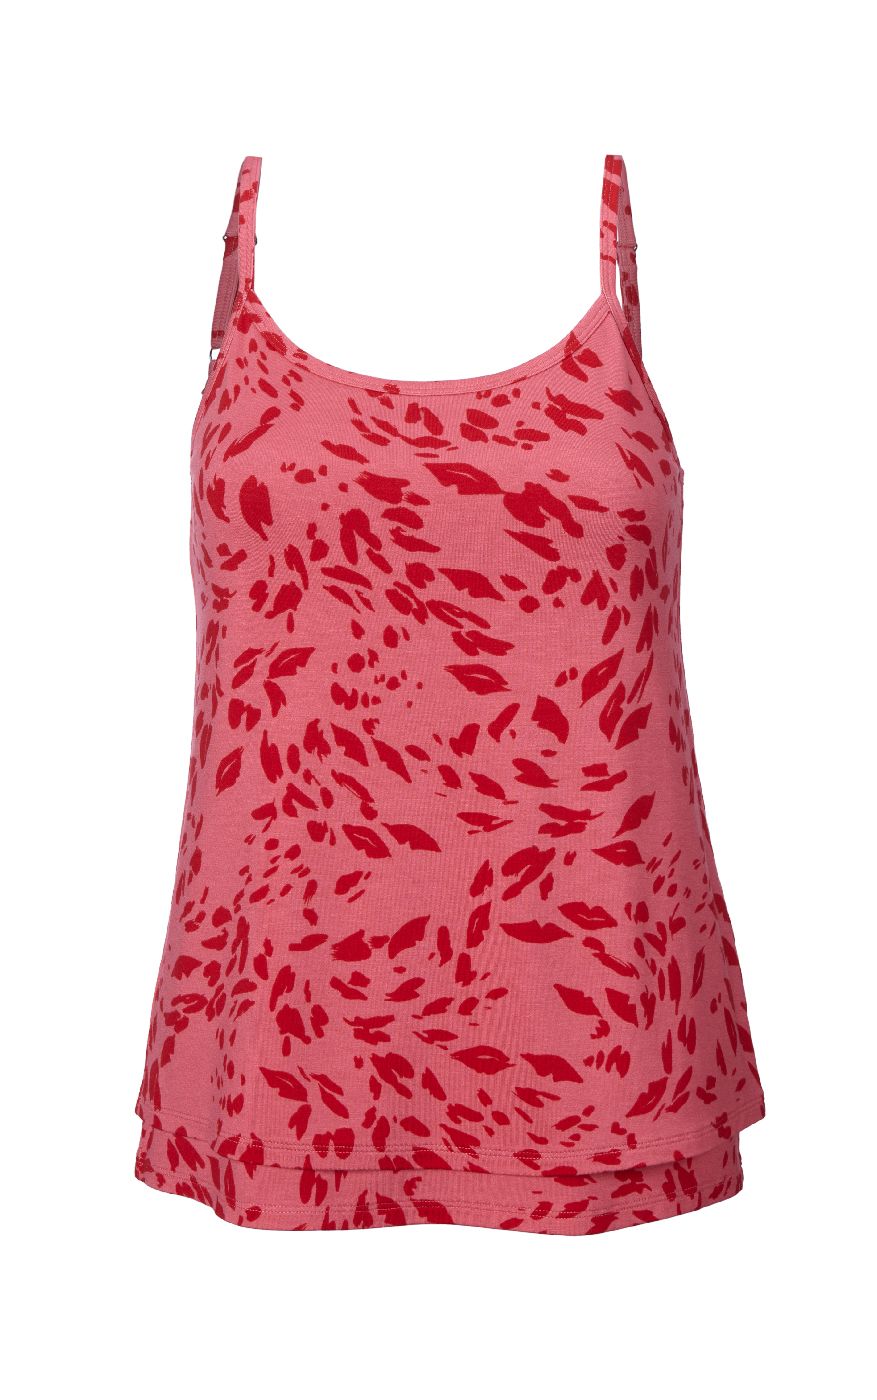 Balcony Cami | cabi Spring 2023 Women’s Clothing & Accessories | cabi